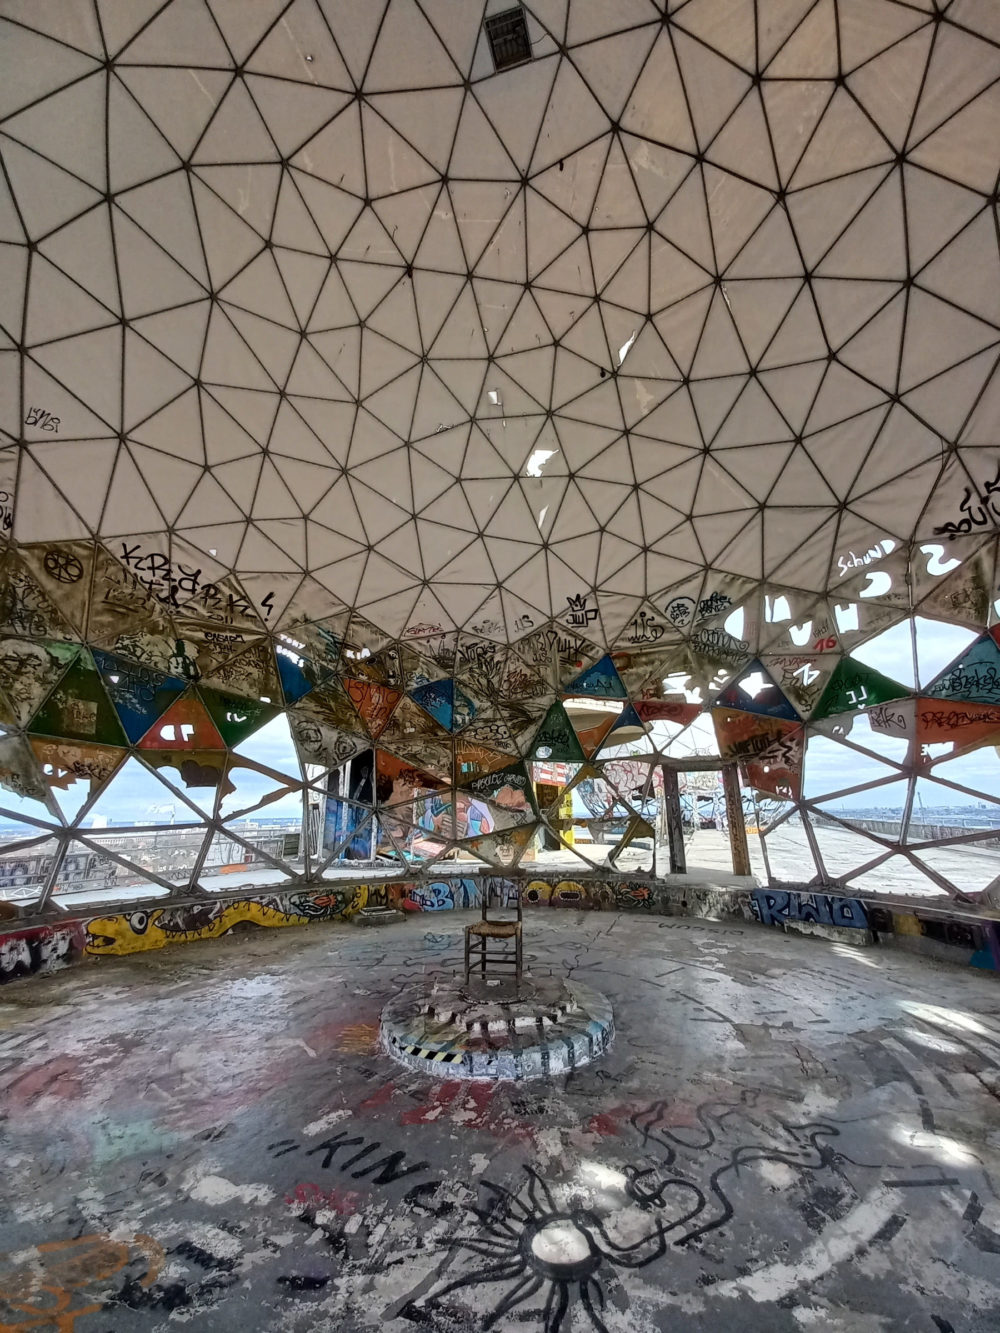 Inside one of the The Teufelsberg spy domes